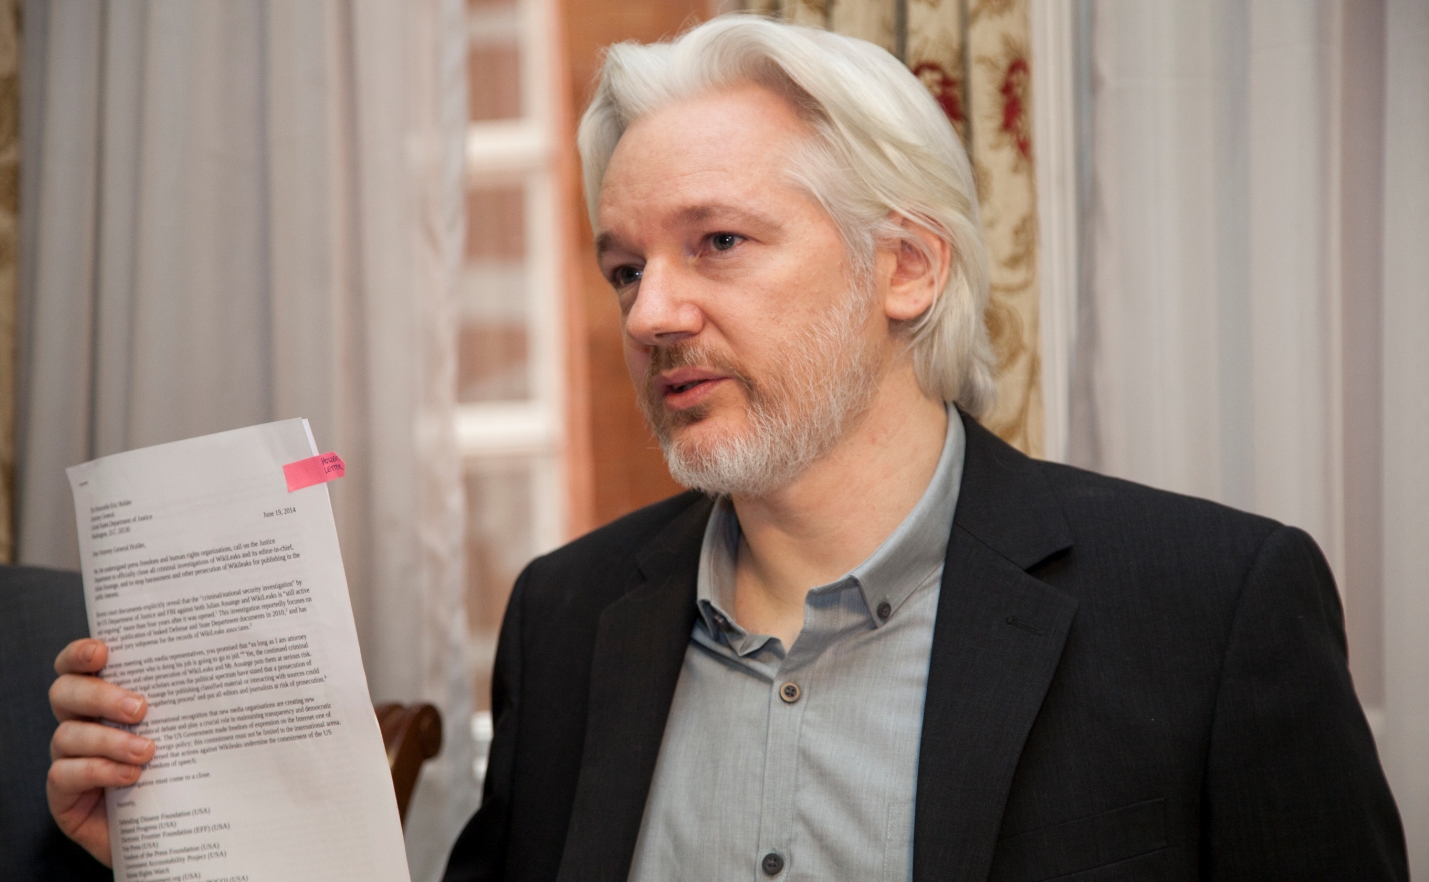 Image: How many times must Assange be proven right before people start listening?